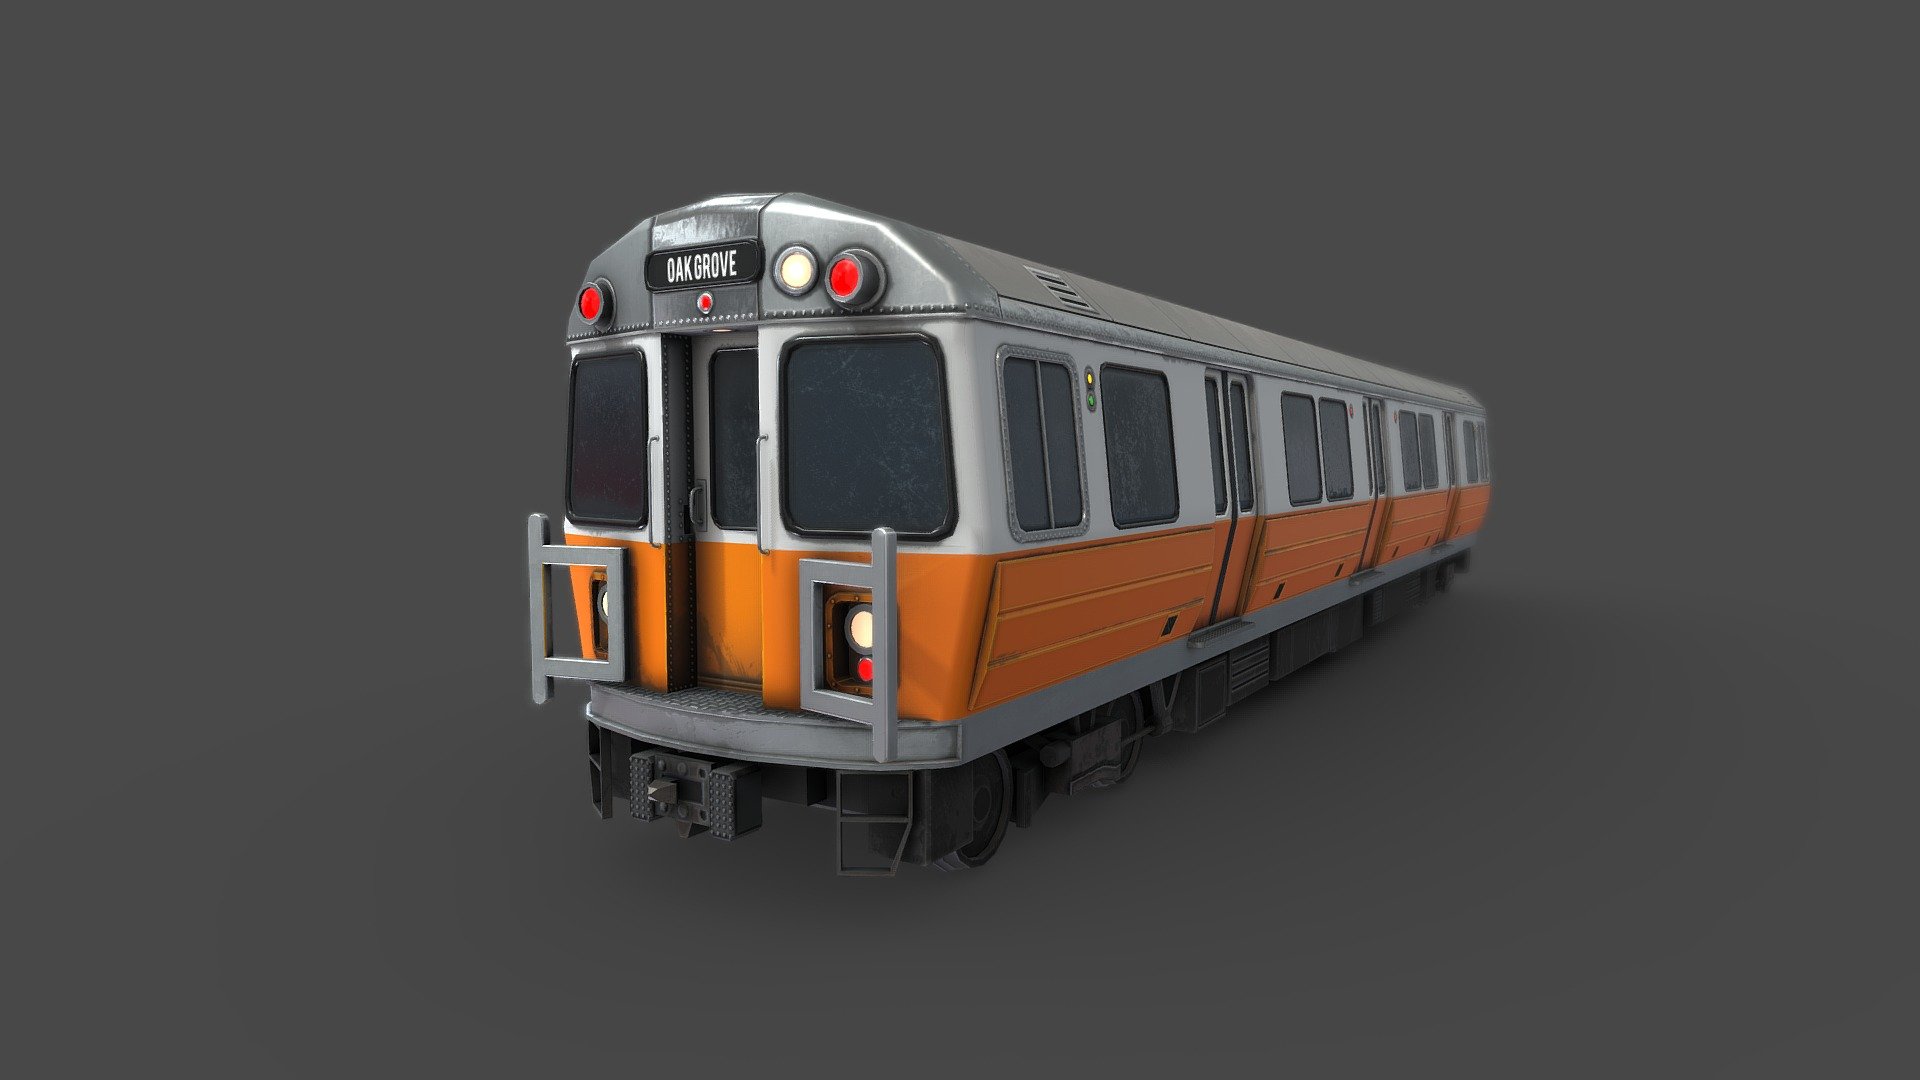 Orange Line subway train.

Modeled in Autodesk Maya 2016, textured in Substance Painter 2019.3.3

Includes:

PSDs for each material (customize base color, route info)

Geo in .obj format



*Pre-made livery color options: 

* Orange

* Blue

* Green

* Red

* Yellow

* Purple

* Stock white - Orange Line Subway - Buy Royalty Free 3D model by Evan Hiltz (@evan.hiltz) 3d model